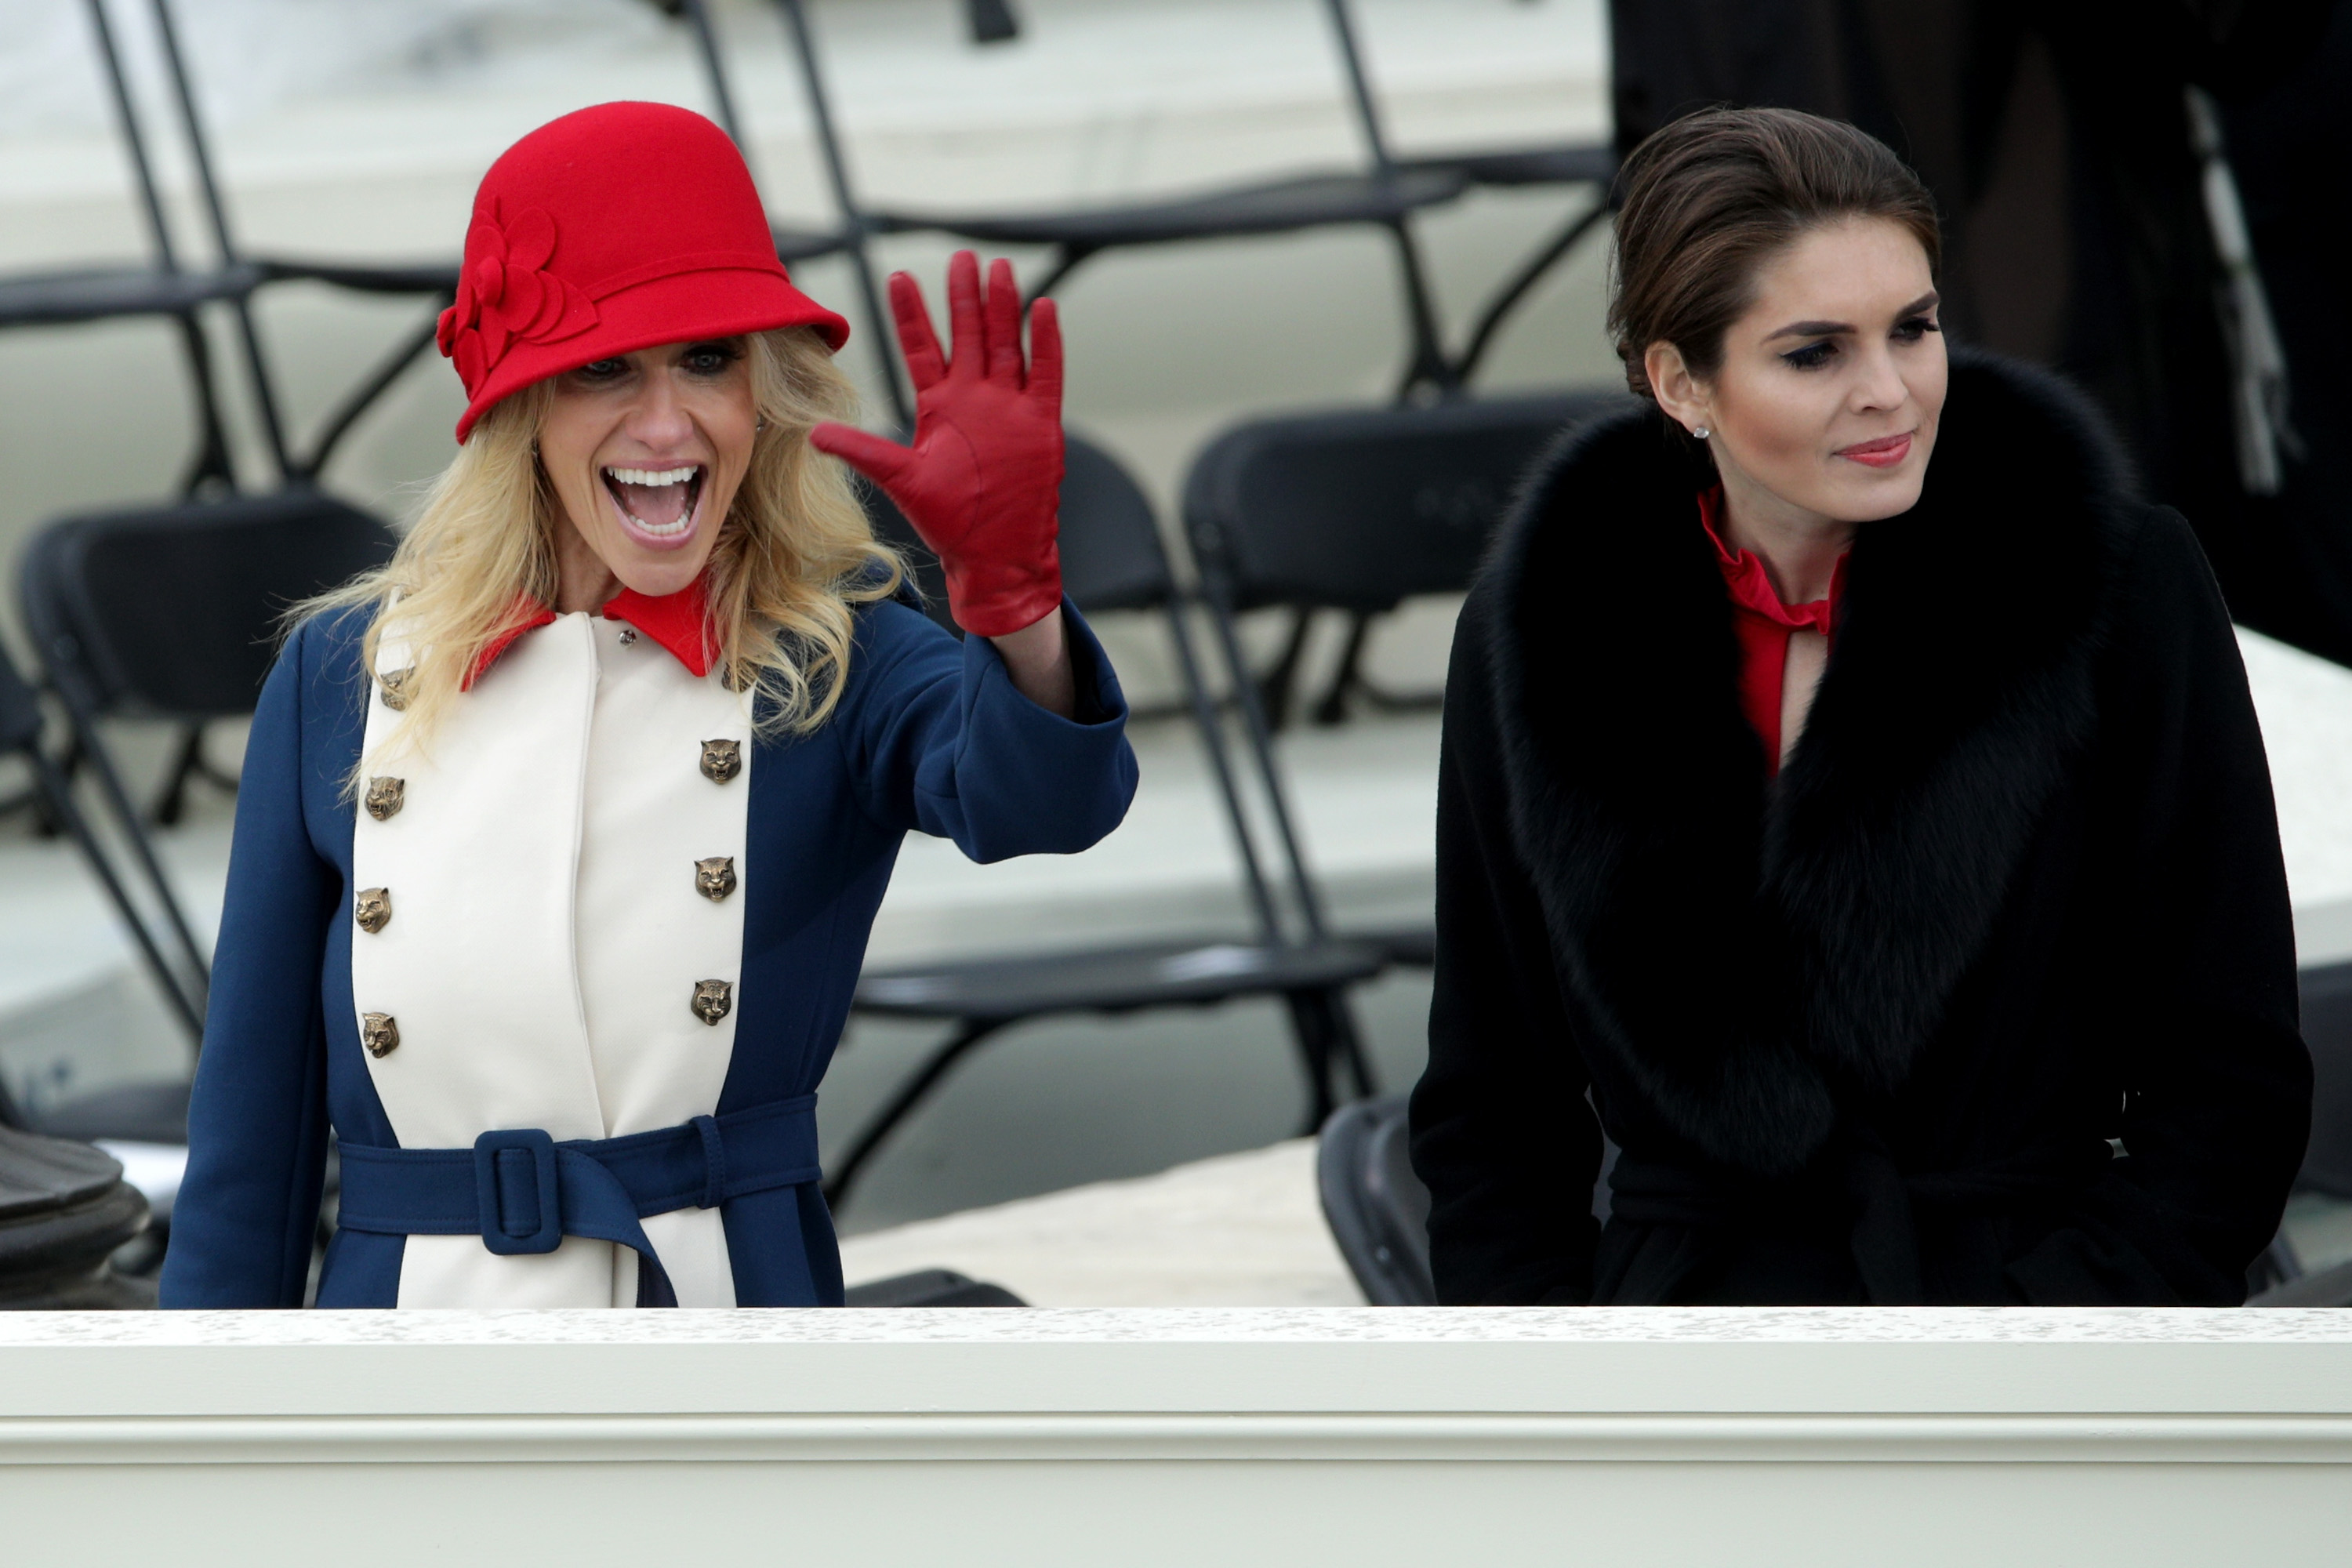 WASHINGTON, DC - JANUARY 20: Trump advisers Kellyanne Conway (L) and Hope Hicks on the West Front of the U.S. Capitol on January 20, 2017 in Washington, DC. In today's inauguration ceremony Donald J. Trump becomes the 45th president of the United States. (Photo by Alex Wong/Getty Images)